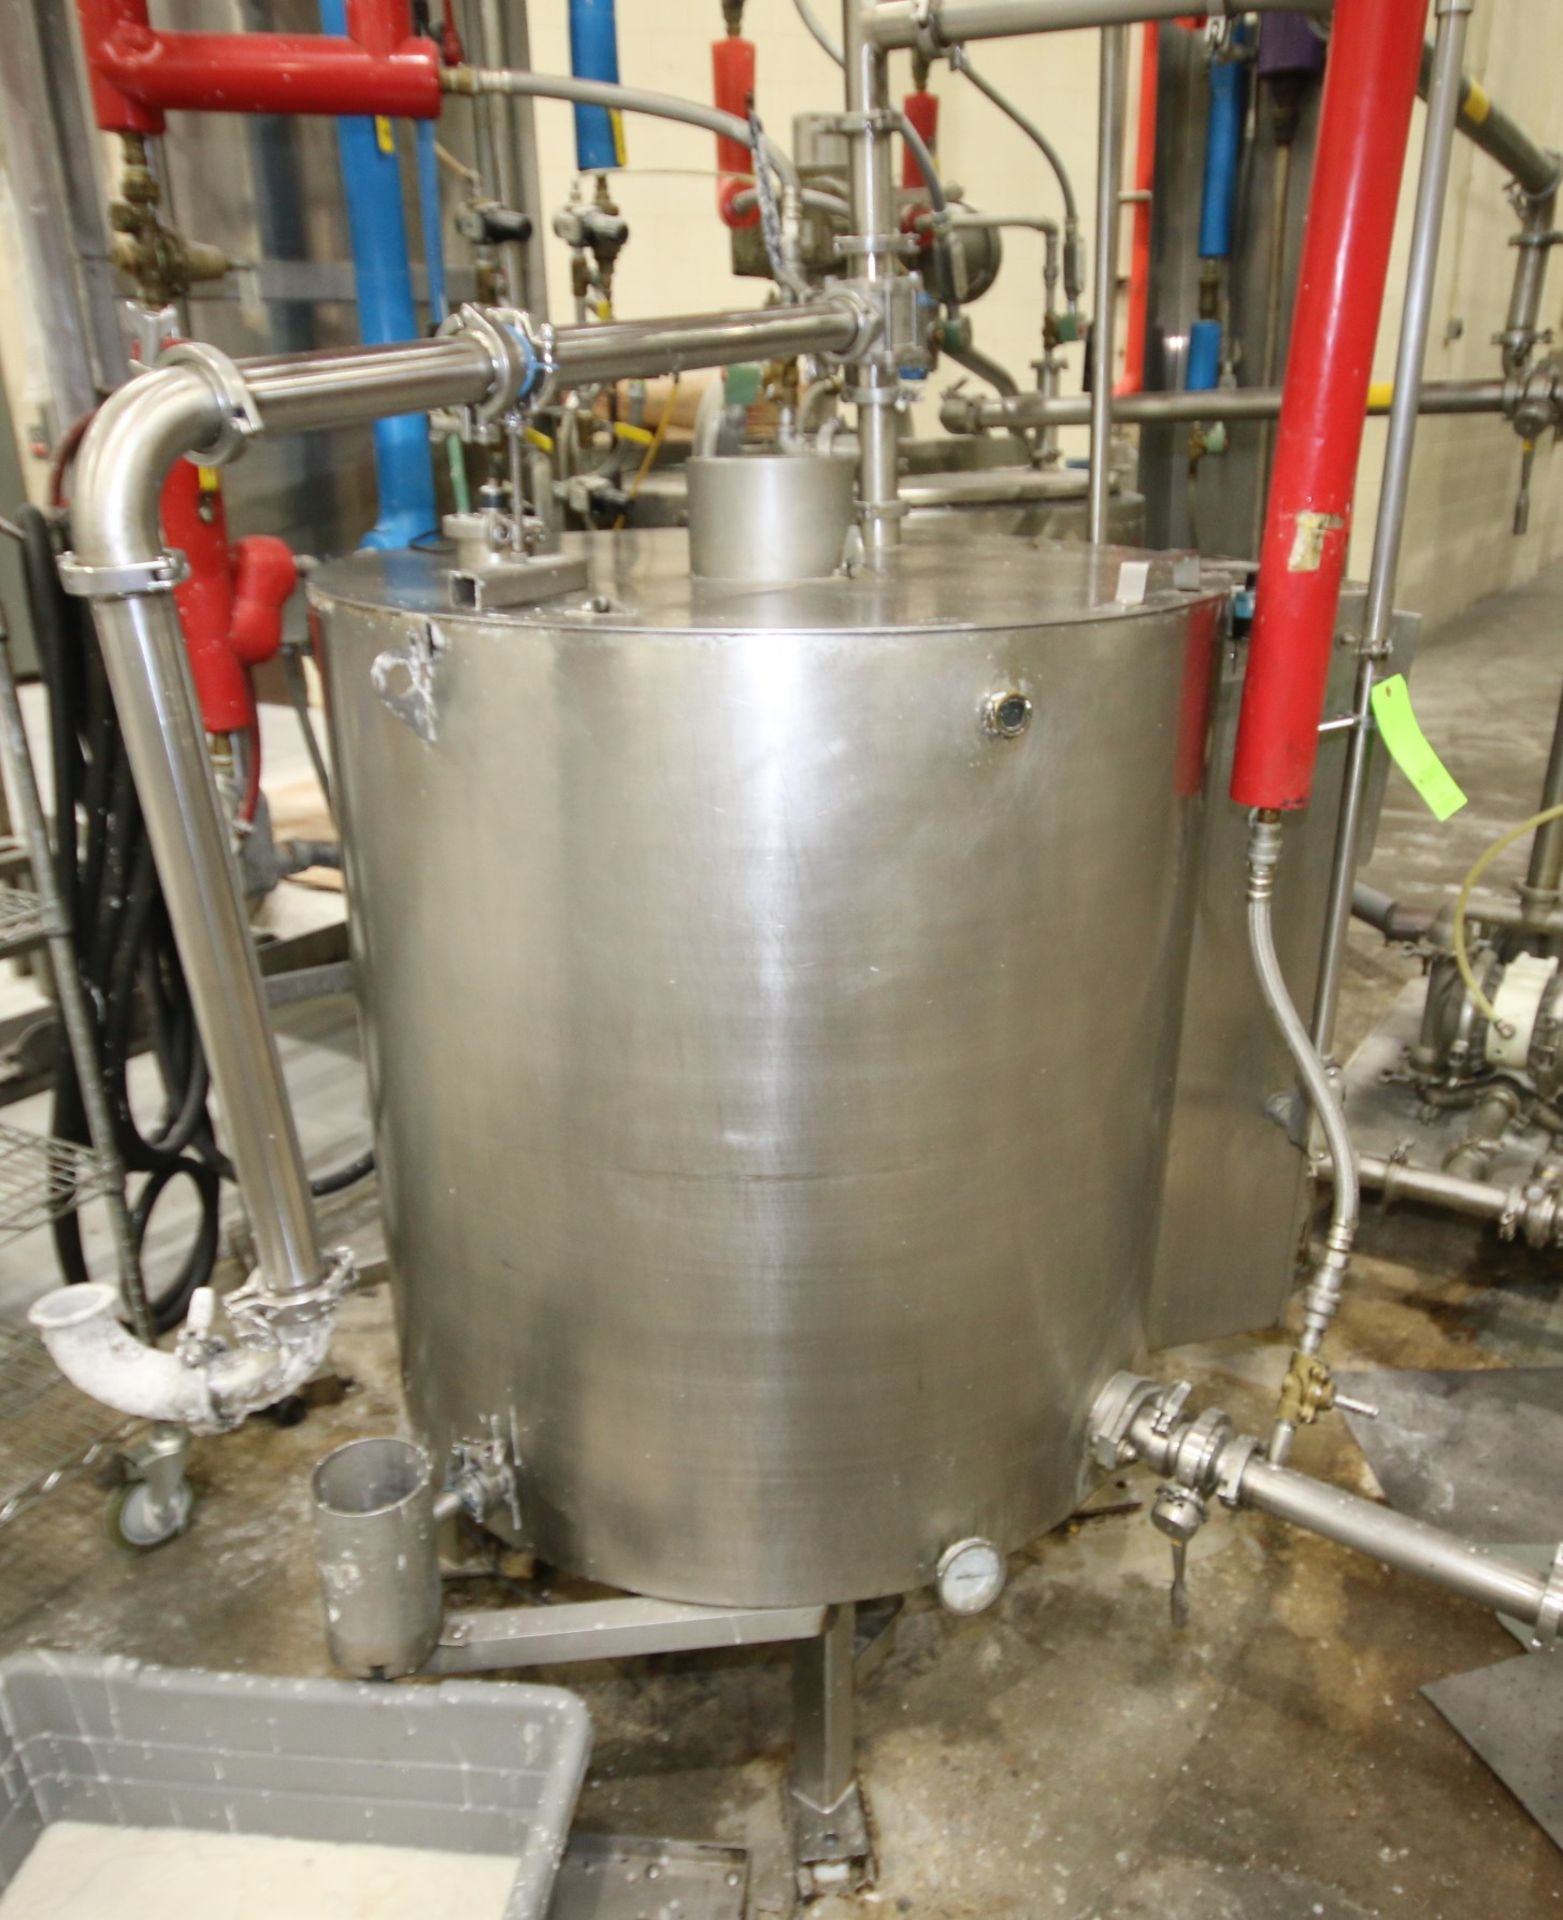 Aprox. 170 Gal. Hinged Lid Jacketed S/S Kettle, 39" H x 36" W, with Scrape Surface Agitator, - Image 3 of 10